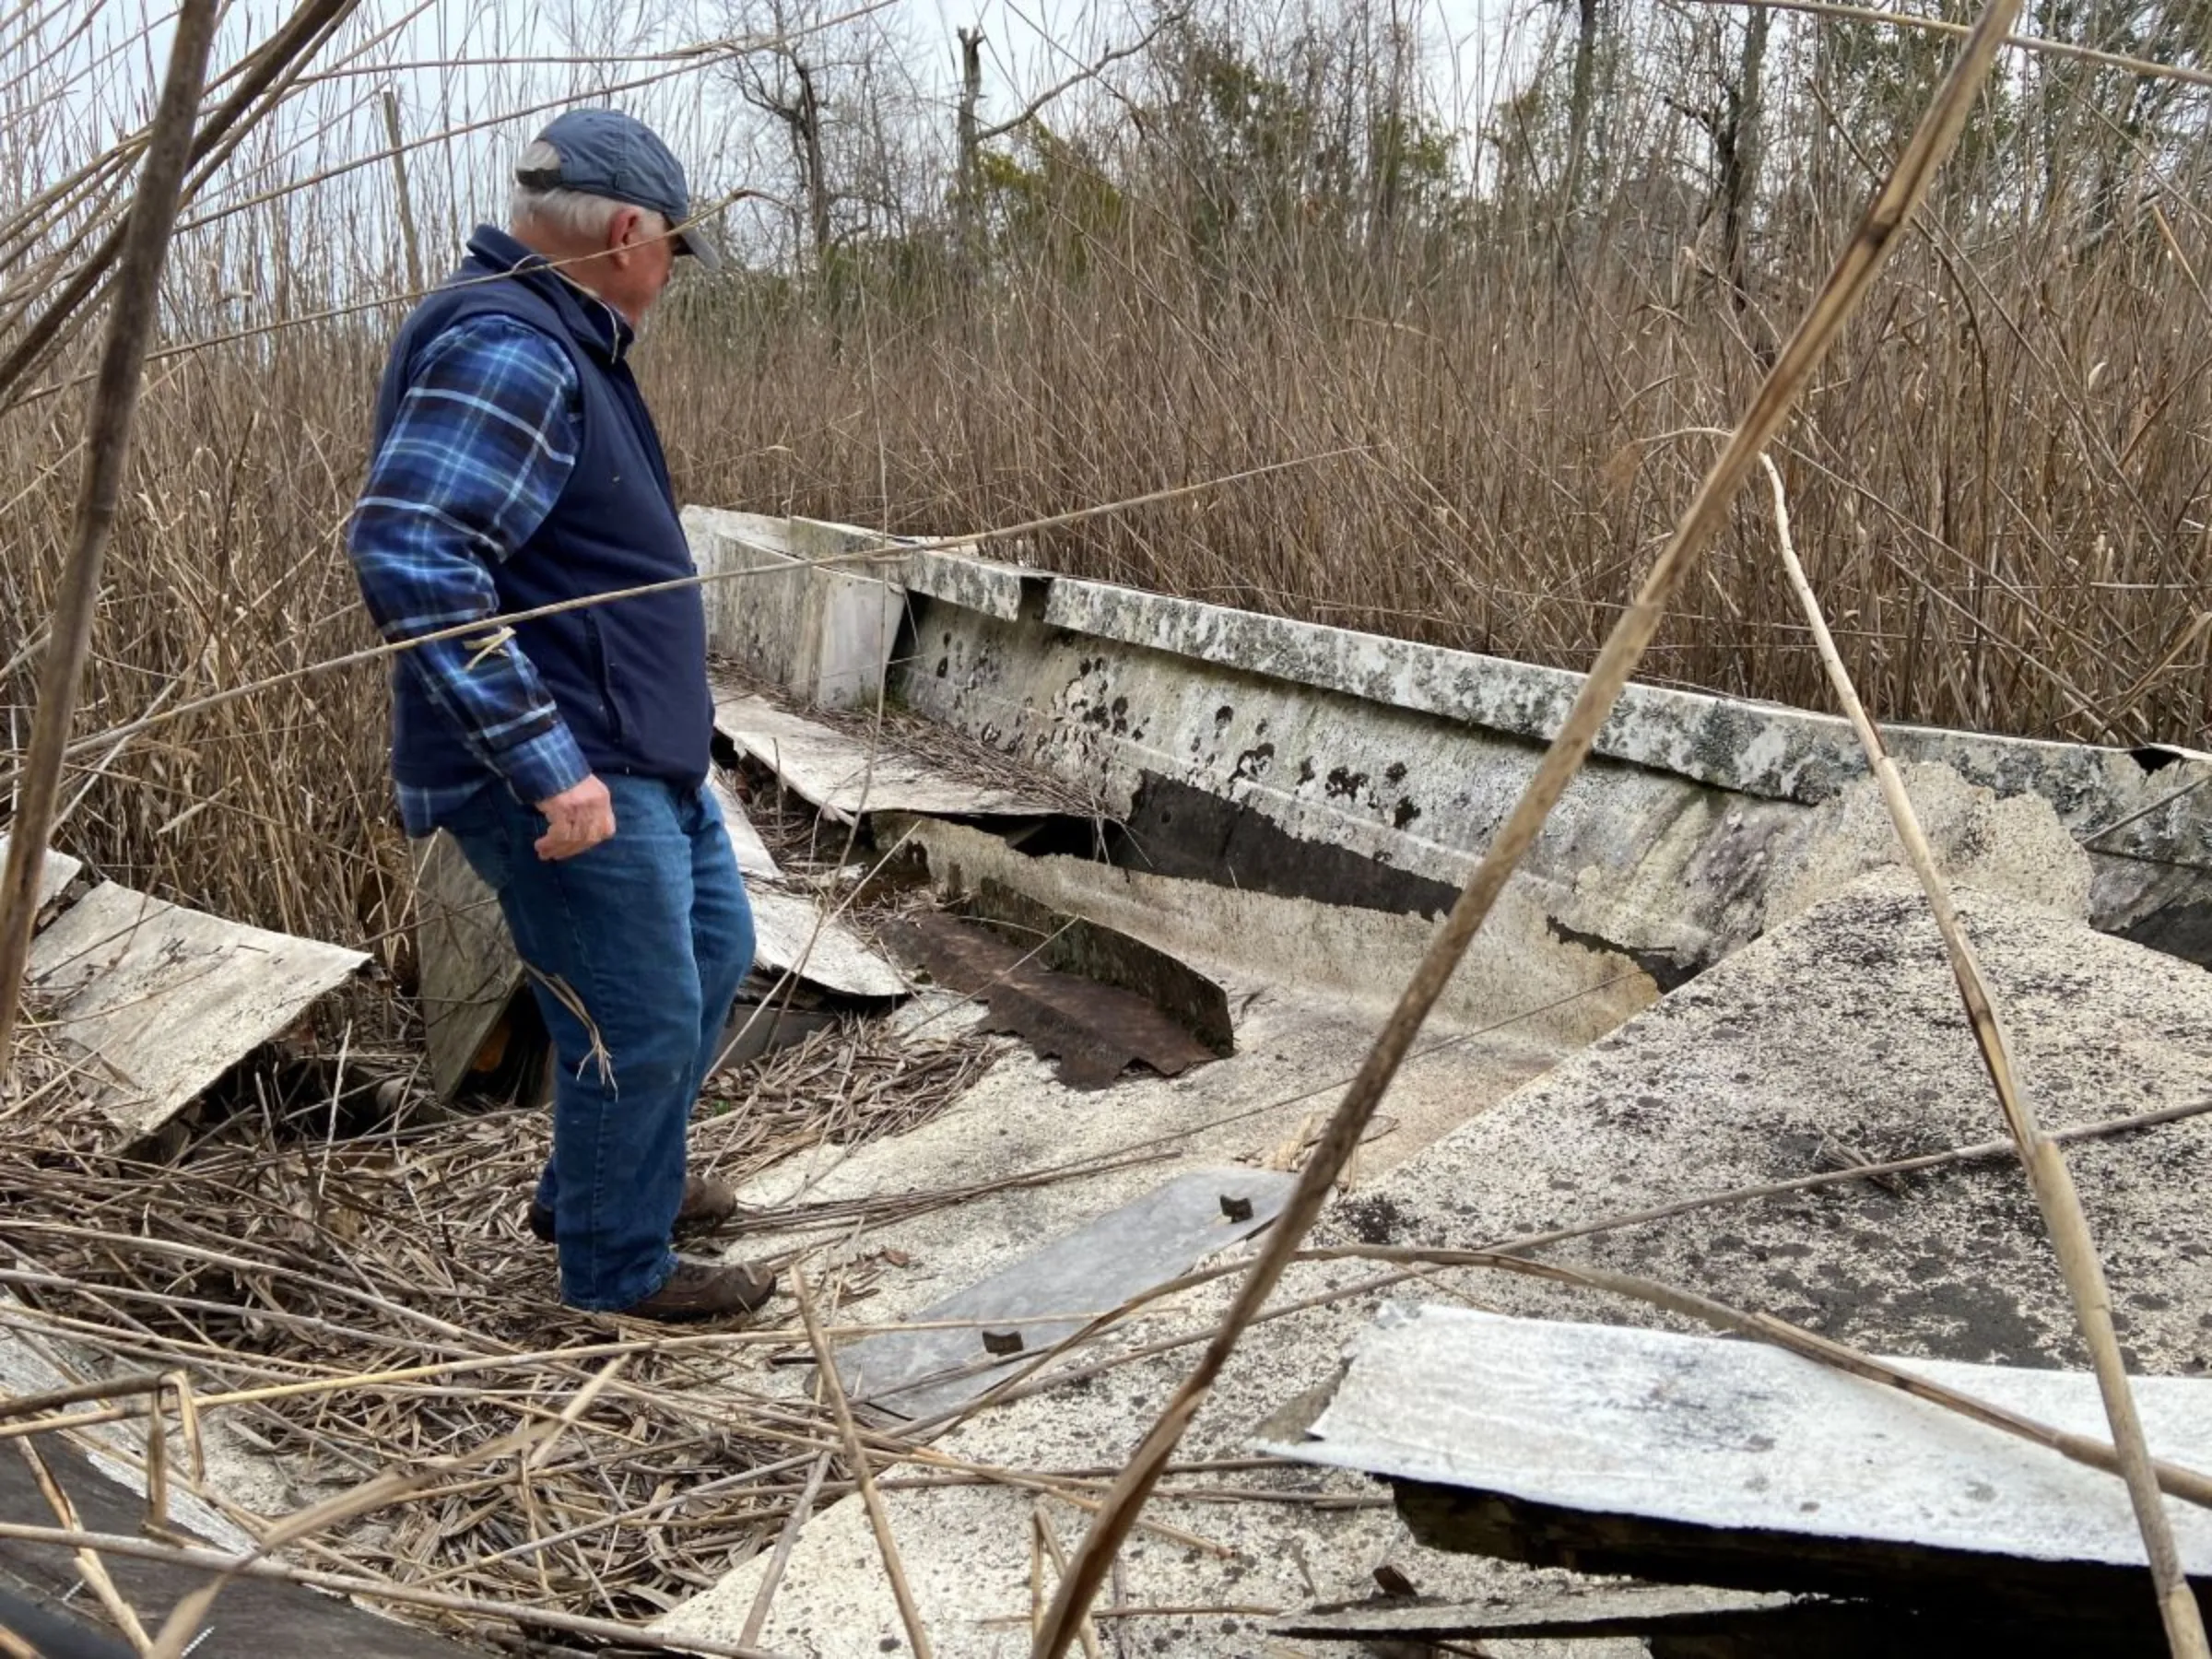 Robert Parr, former oceanographer, examines a wrecked boat at a site across the Cape Fear River from downtown Wilmington in North Carolina, USA, February 29, 2024. Thomson Reuters Foundation/David Sherfinski